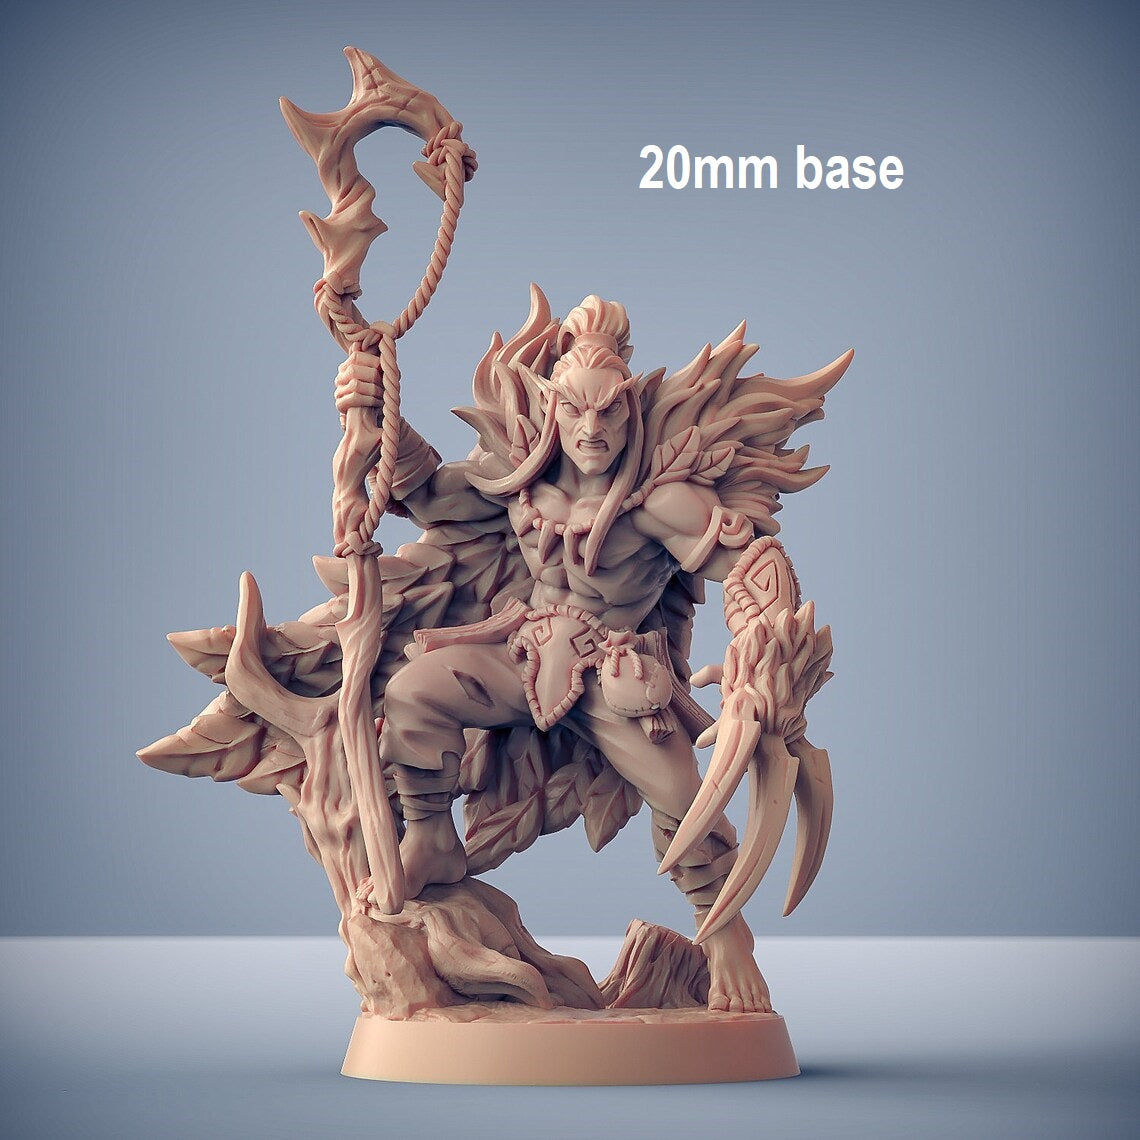 Image shows an 3D render of an elf druid gaming miniature holding a staff in one hand and claw gauntlet on the other